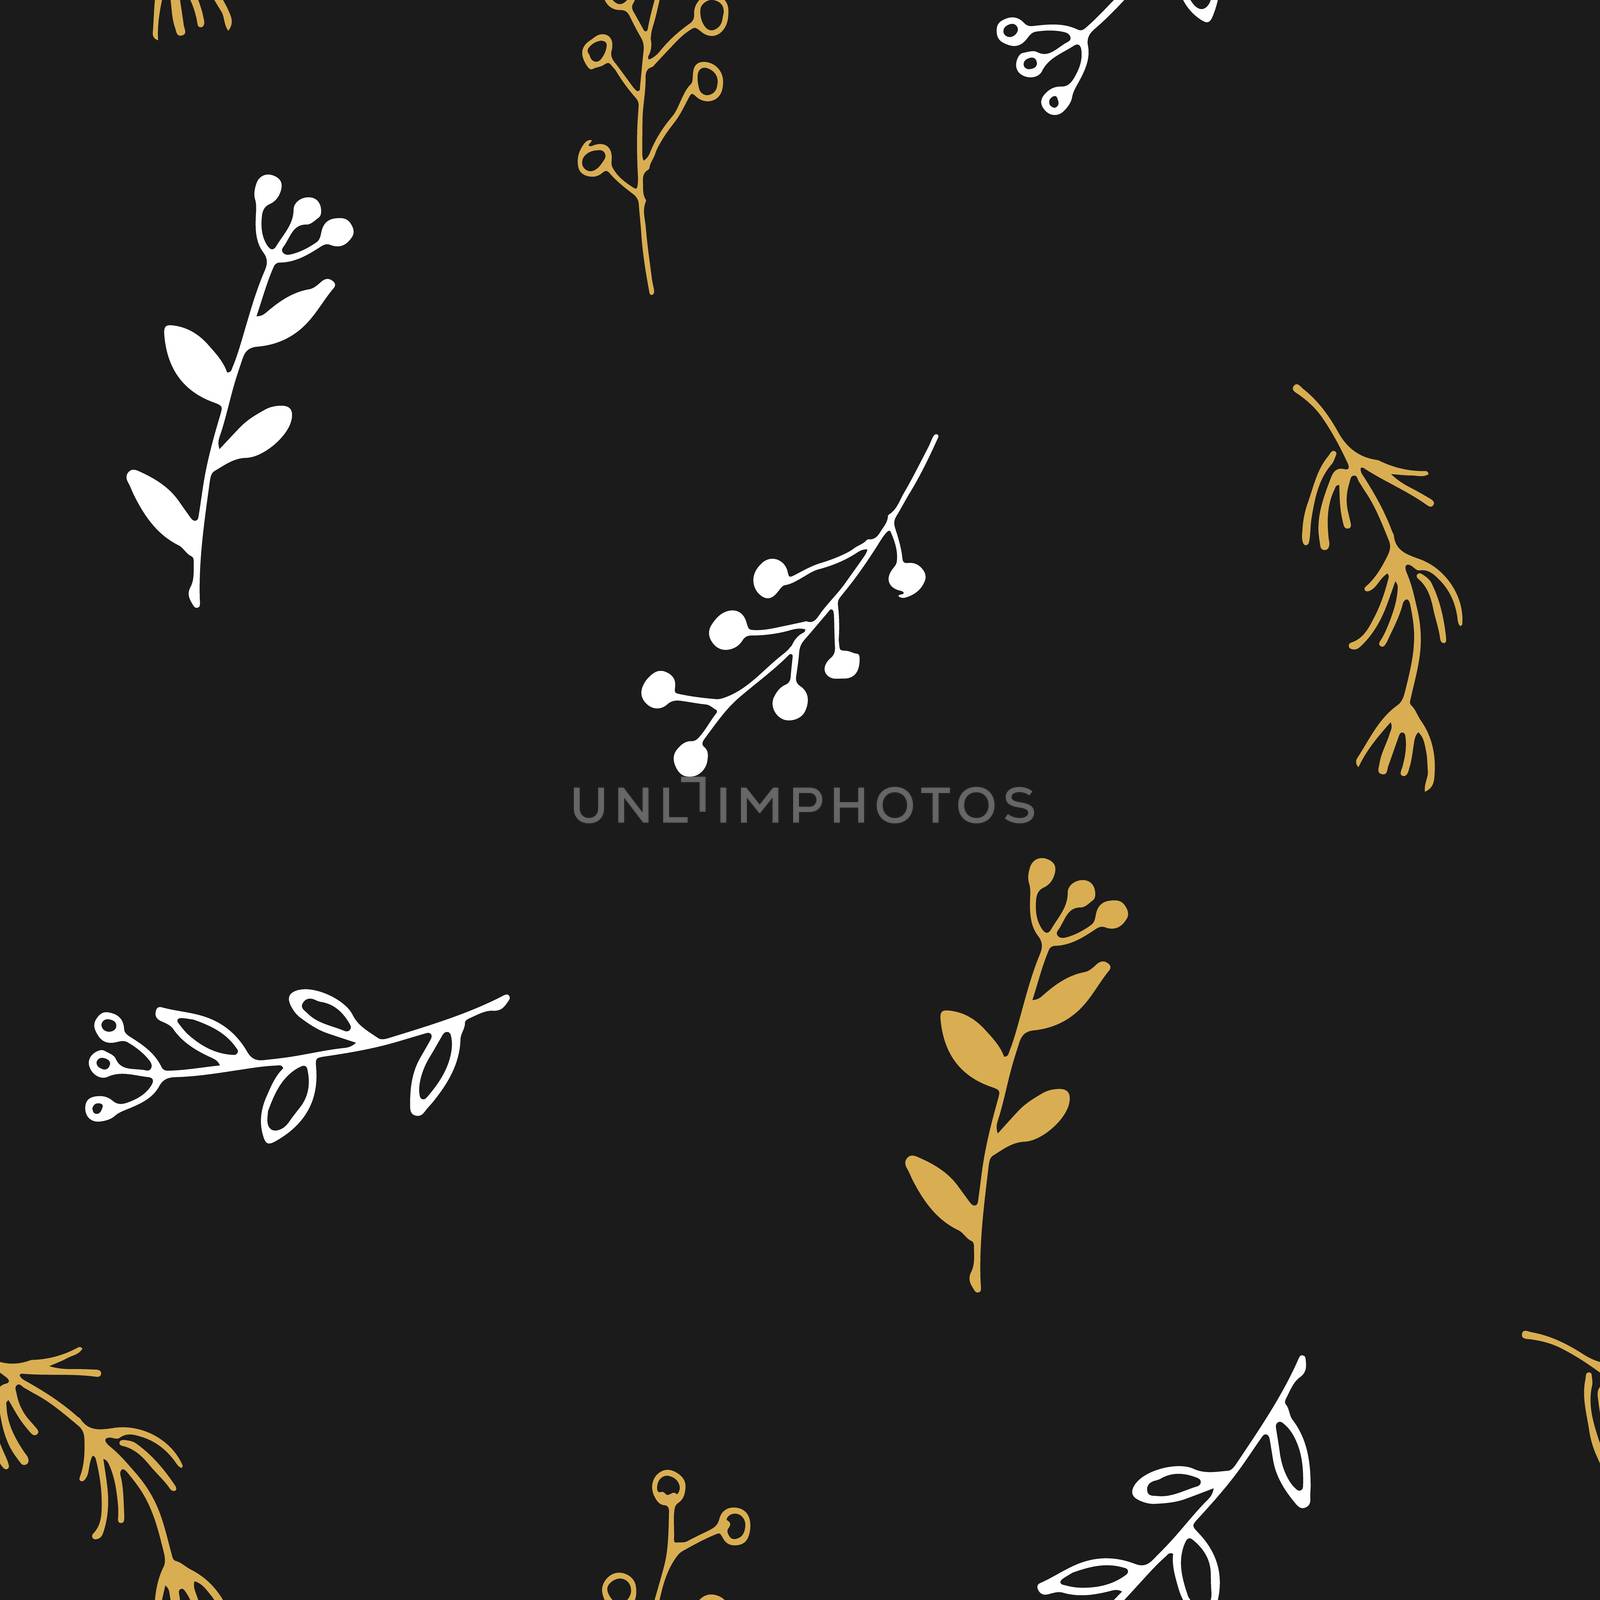 Branches hand drawn doodles Seamless Pattern, Christmas wreath decoration background. Vector illustration by Lemon_workshop